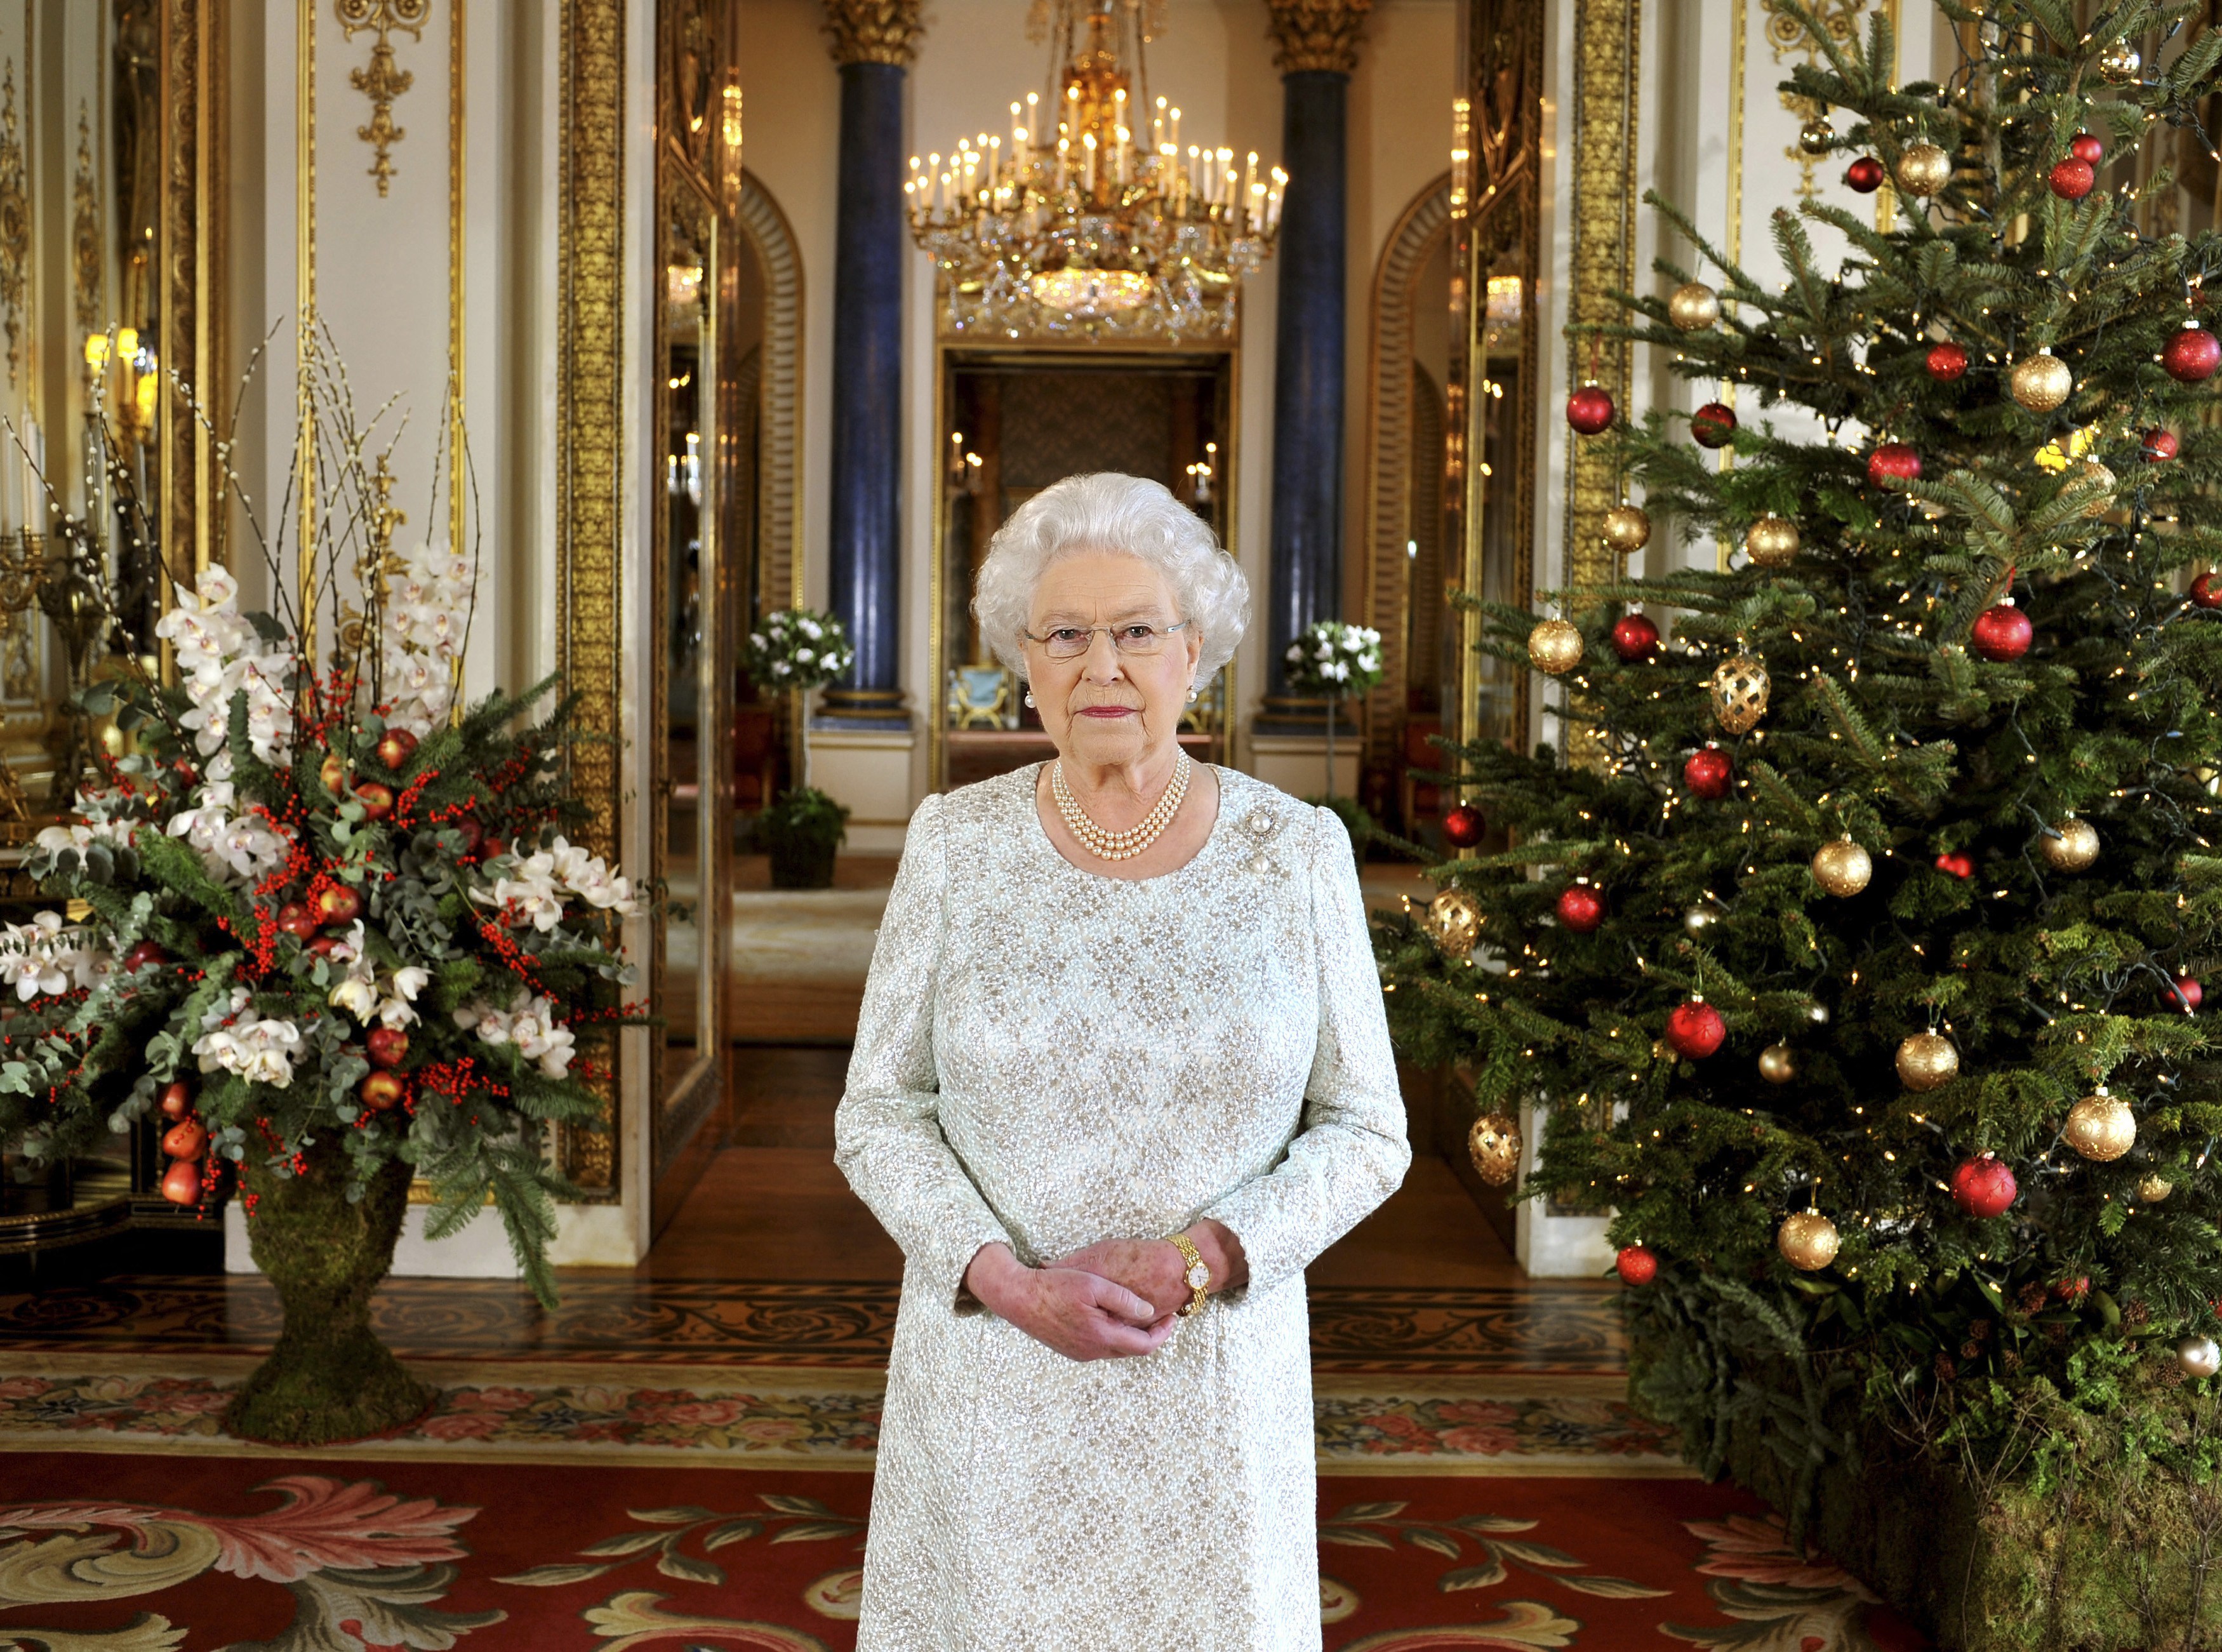 Britain's Queen Elizabeth records her Christmas message in 3-D from the White Drawing Room of Buckingham Palace